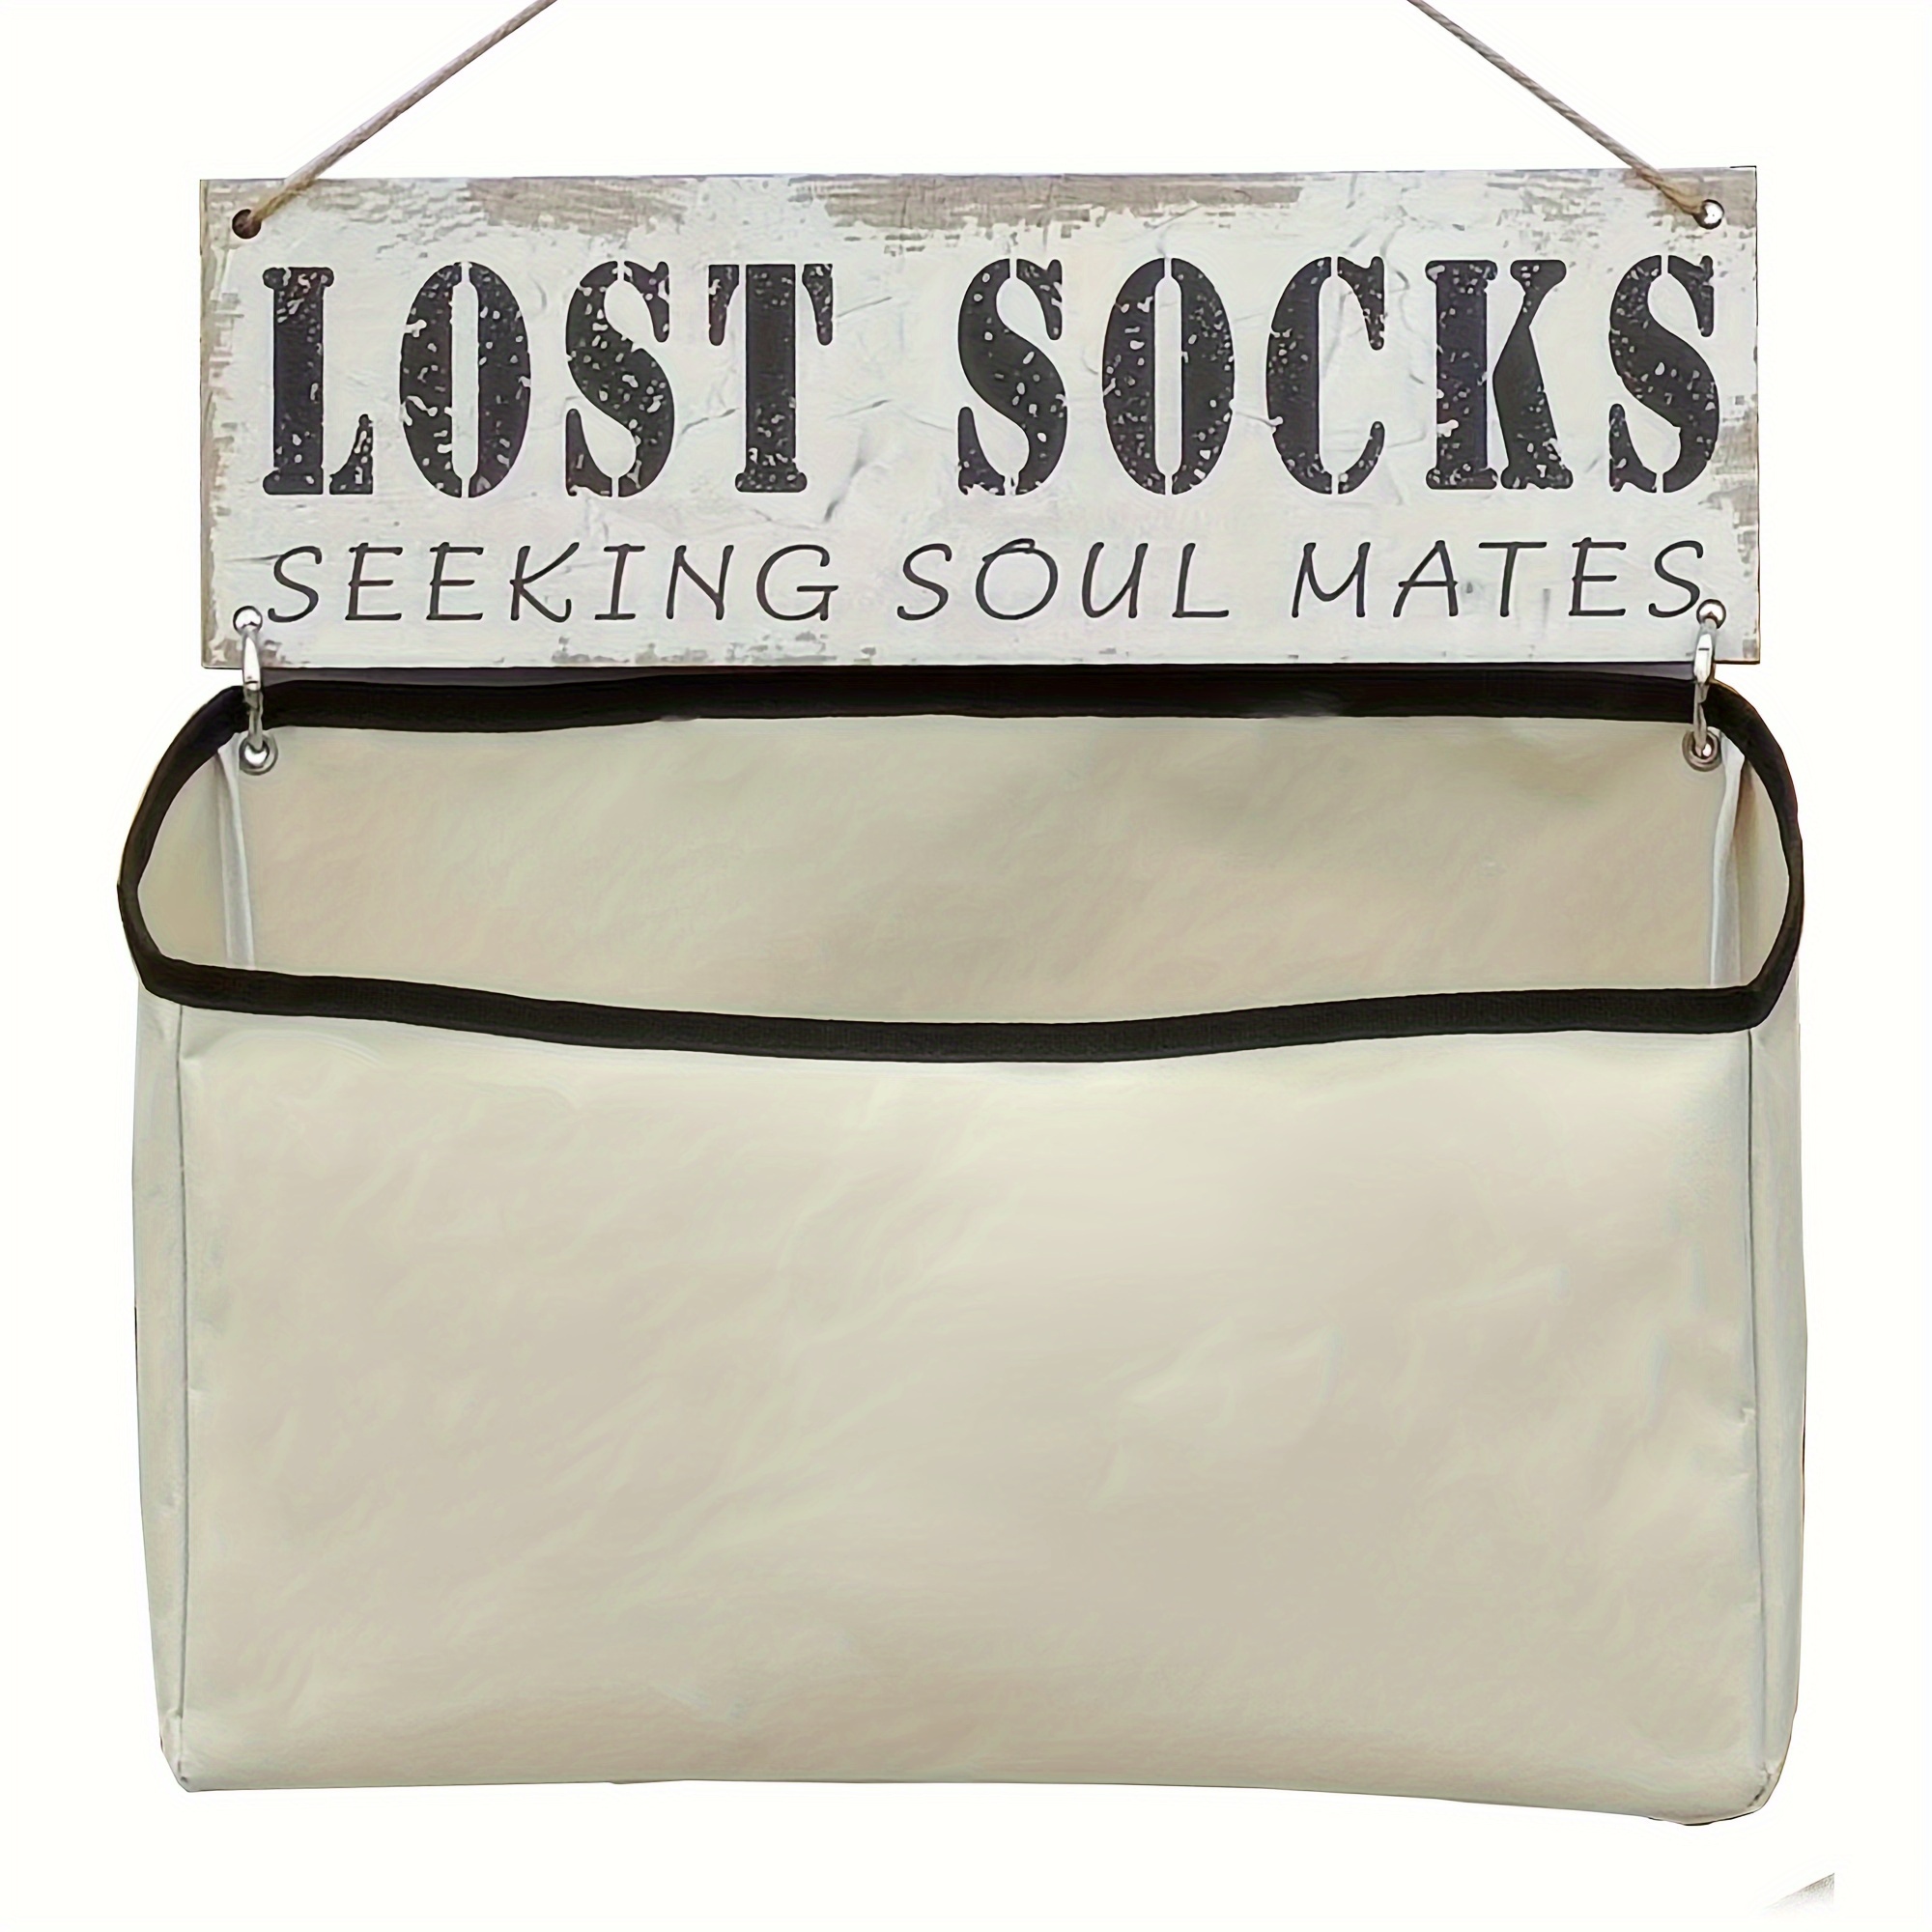 

1pc Laundry Lost Socks Bag Wall-mounted Lost Sock Organizer - Keep Your Laundry Room Clutter-free And Easily Find Your Missing Socks